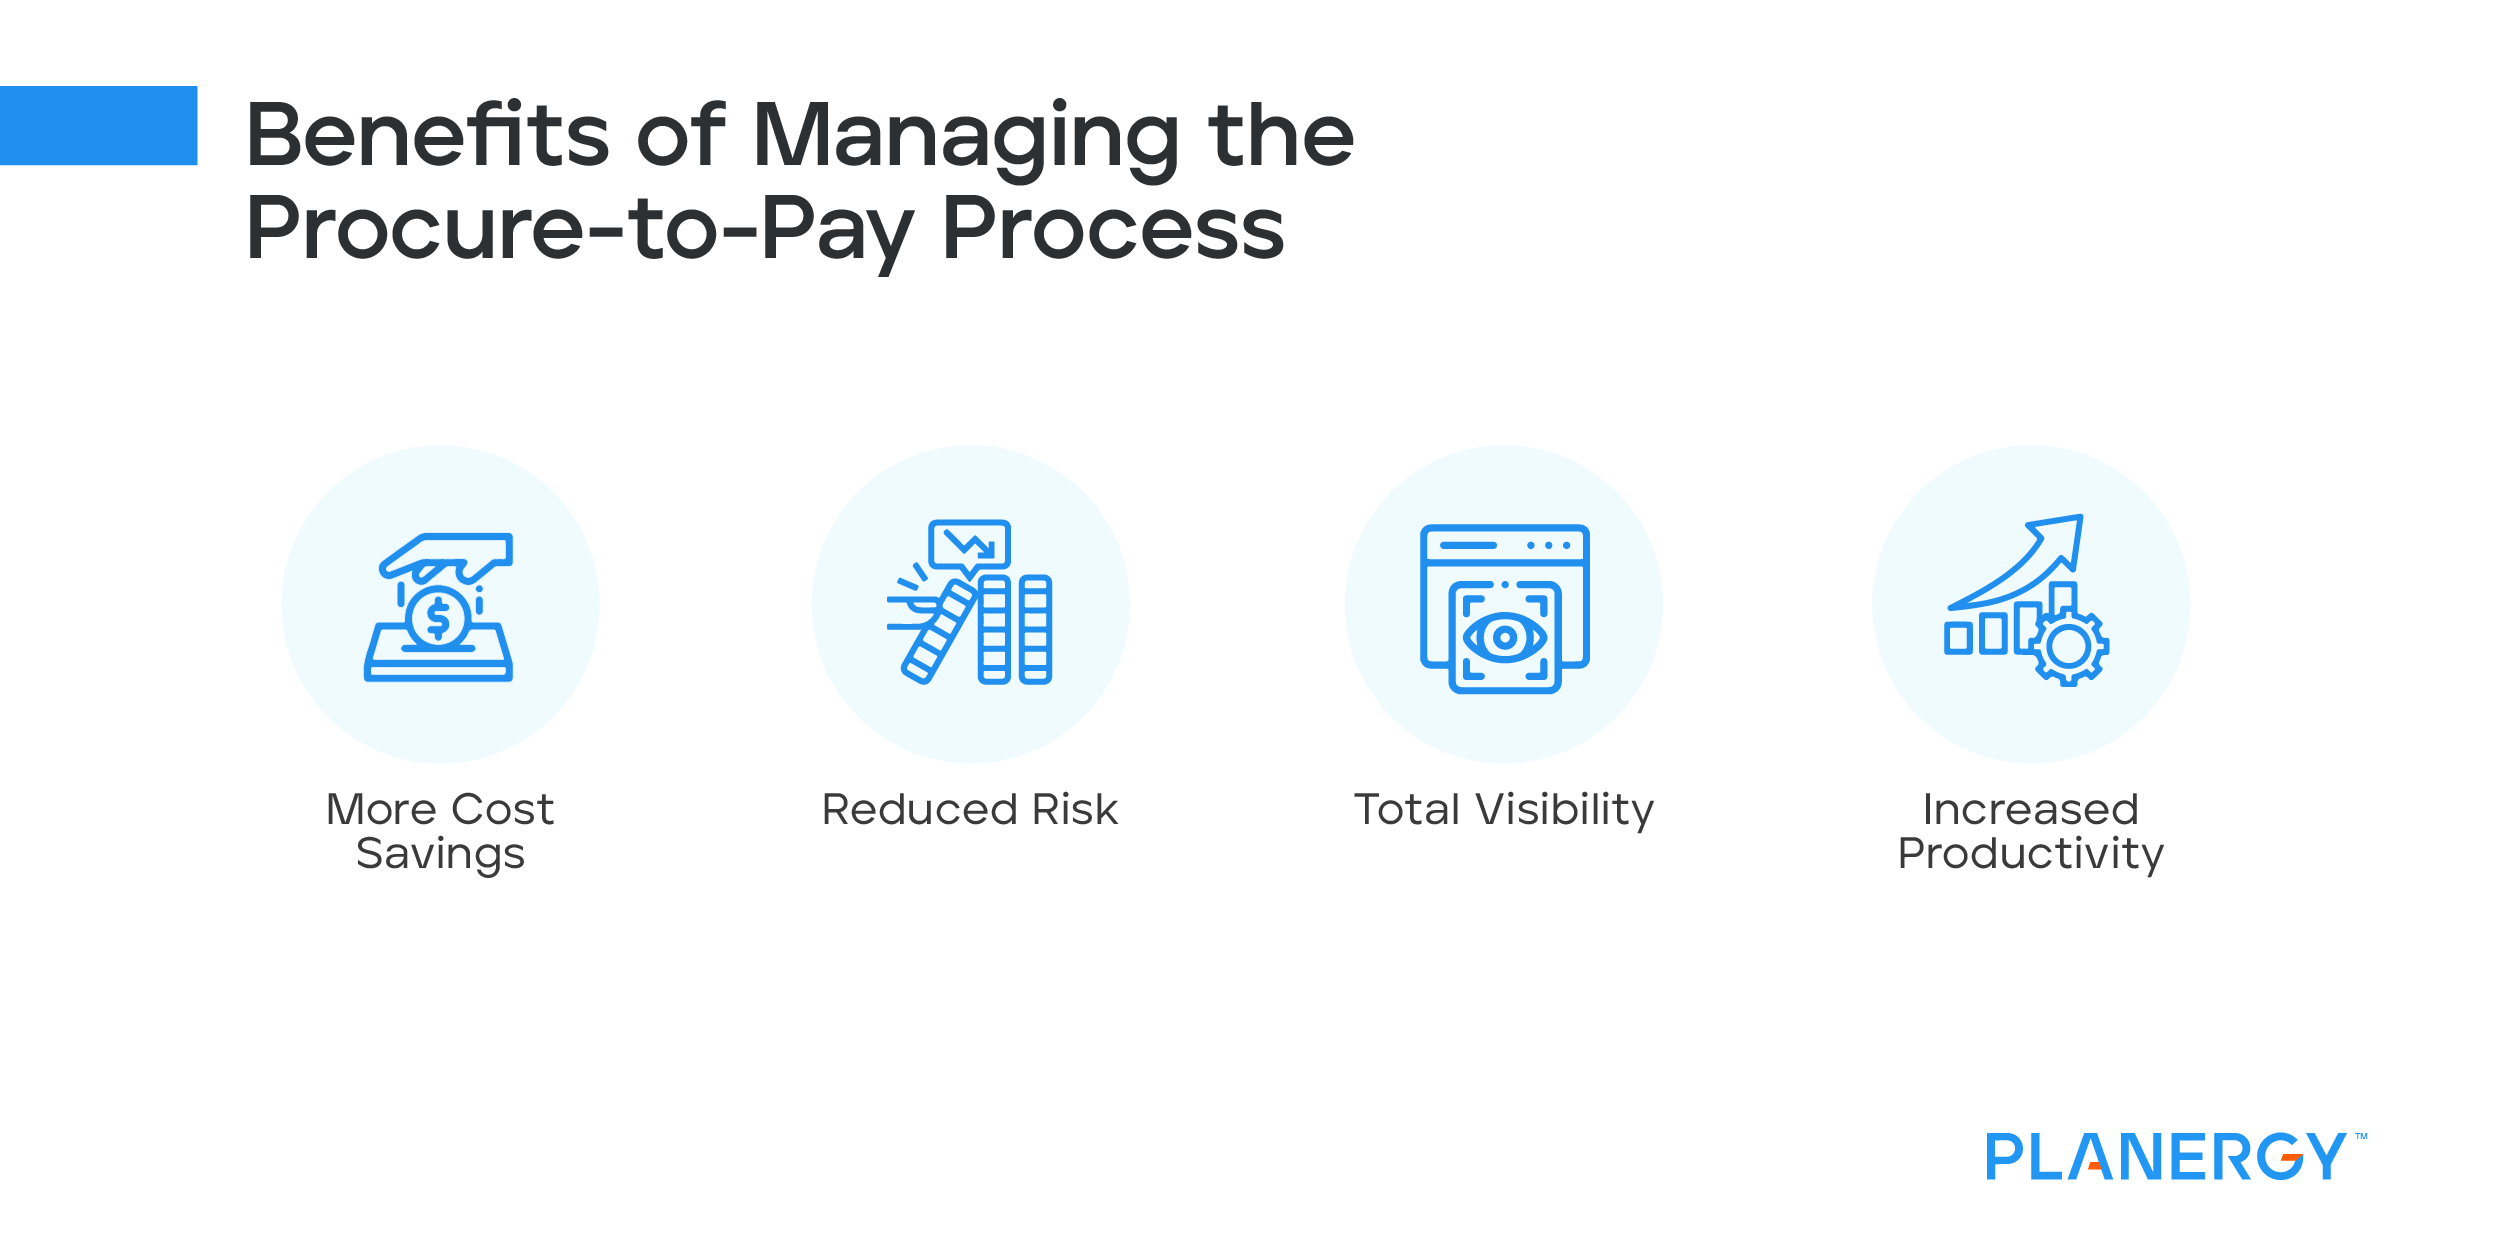 Benefits of Managing Procure to Pay Process